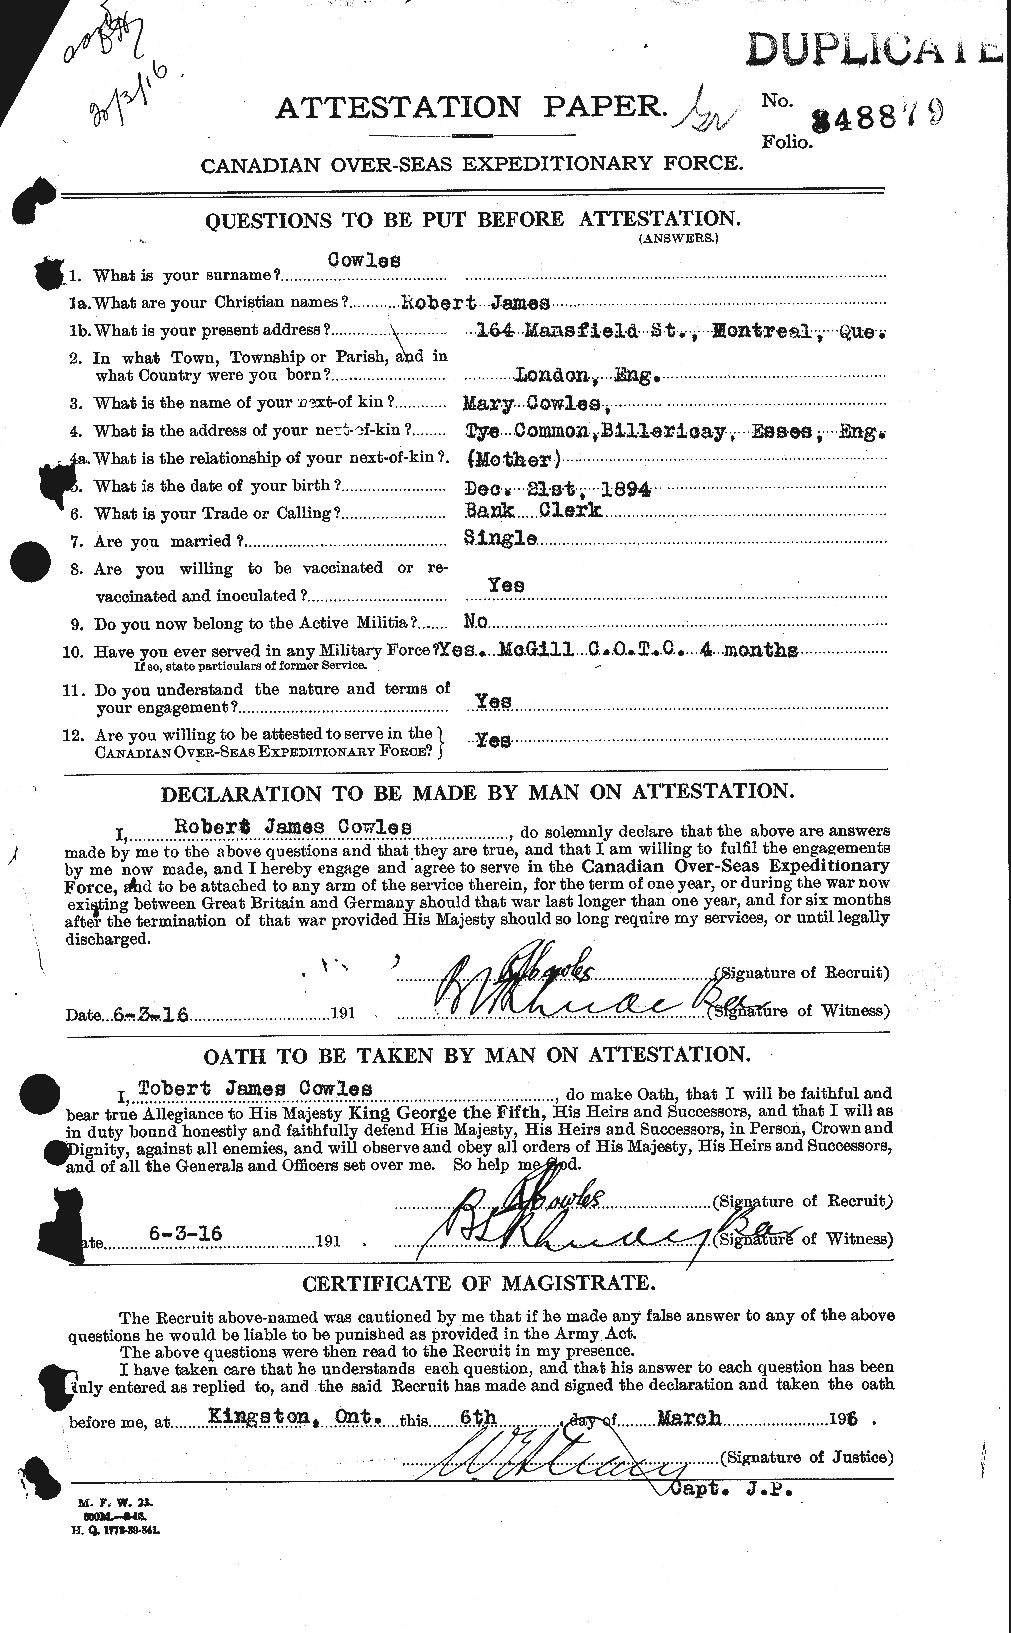 Personnel Records of the First World War - CEF 059828a